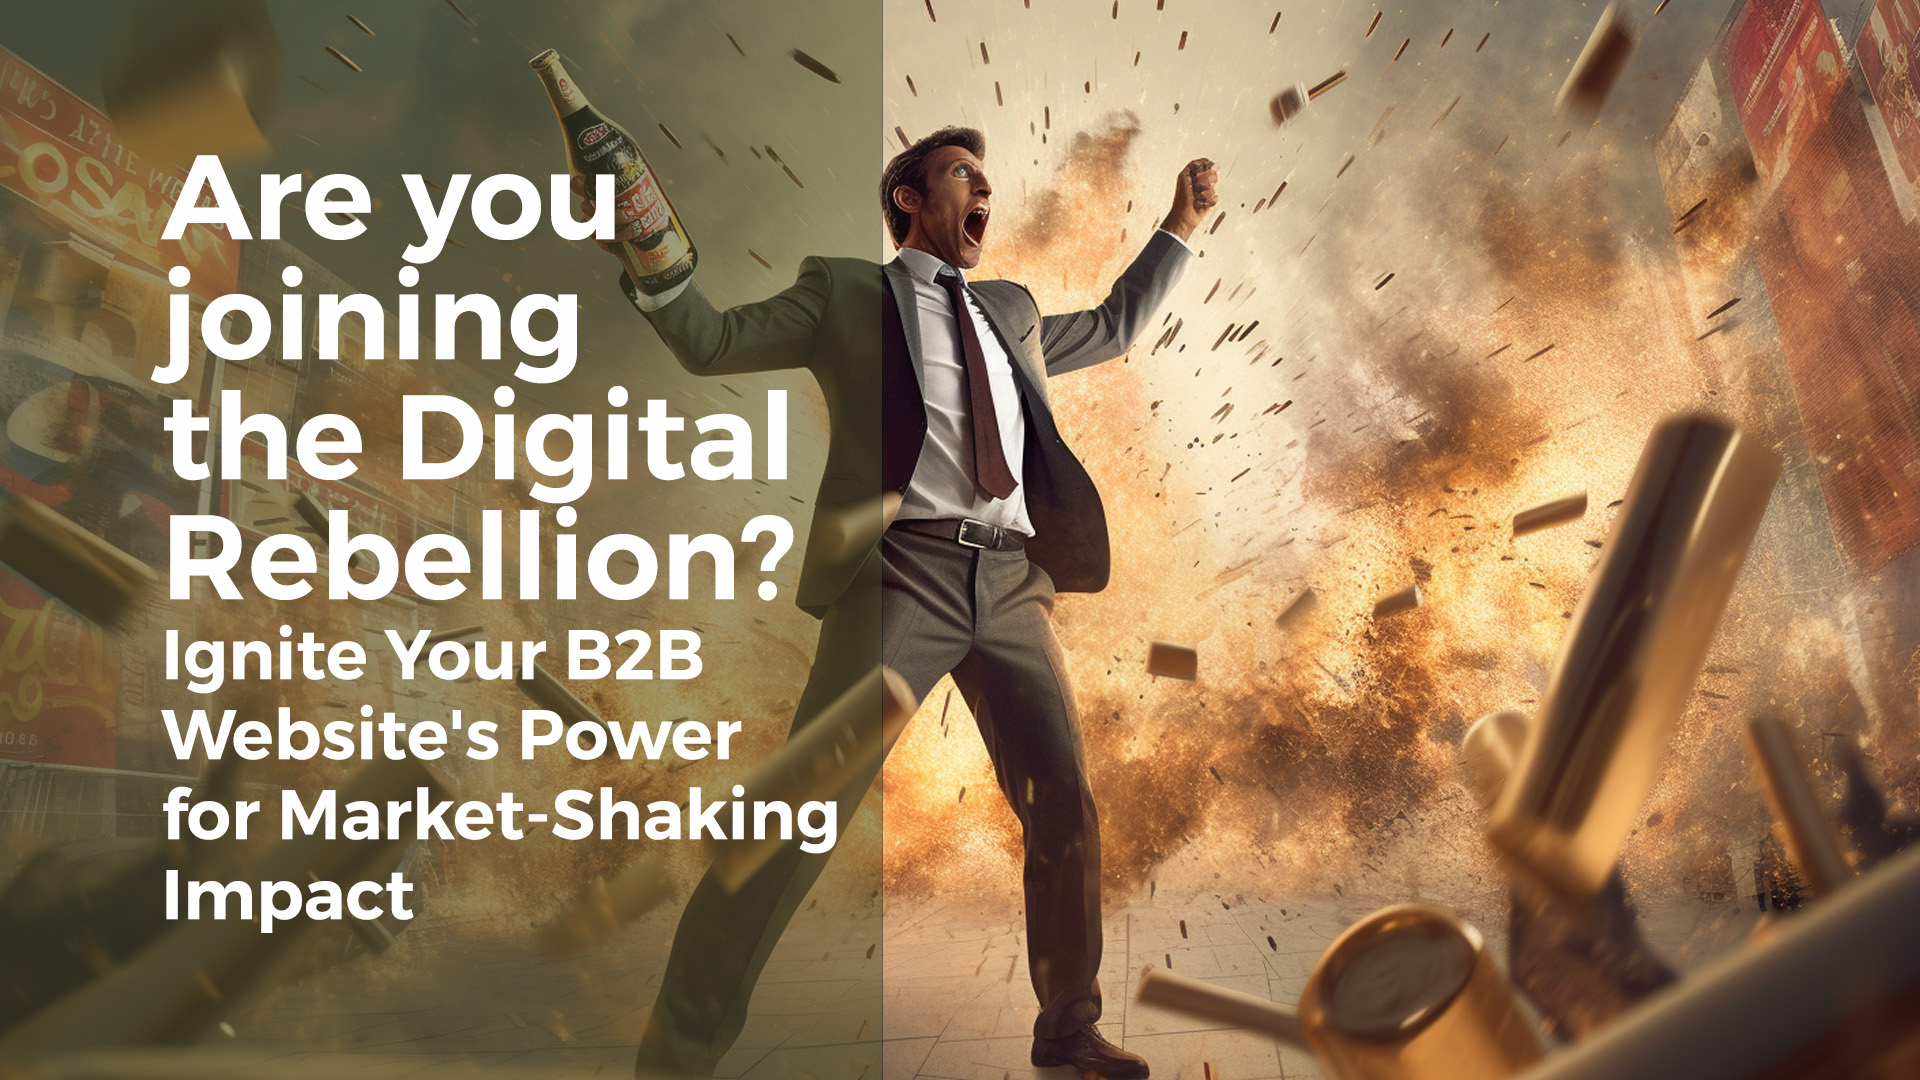 Are you joining the Digital Rebellion? Ignite Your B2B Website's Power for Market-Shaking Impact